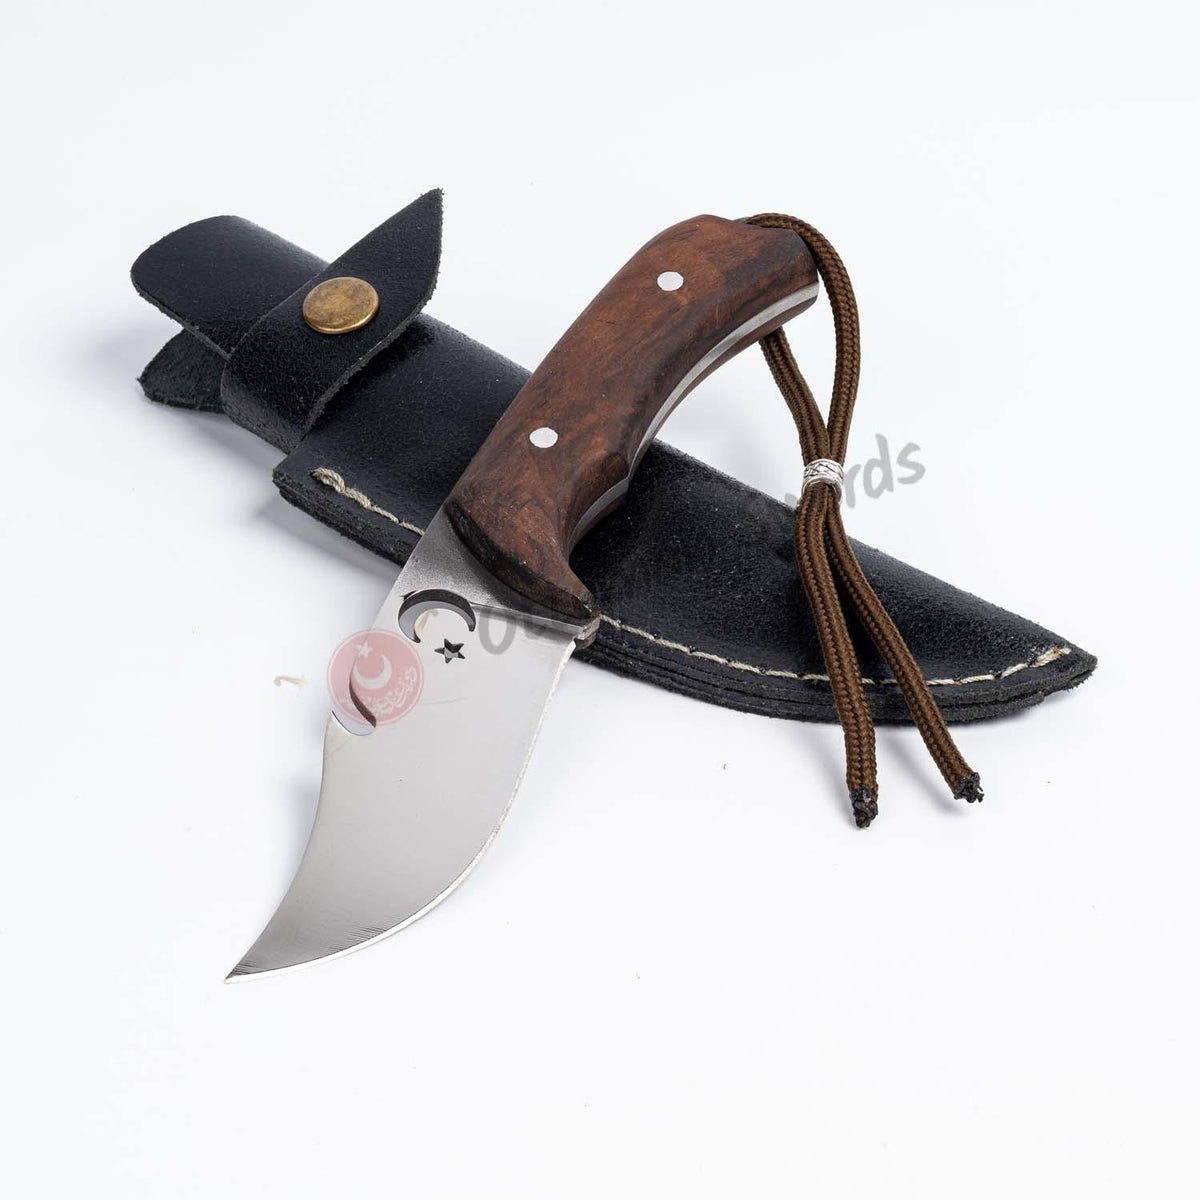 Hook Camping and Hunting Knife 8.6 (1)